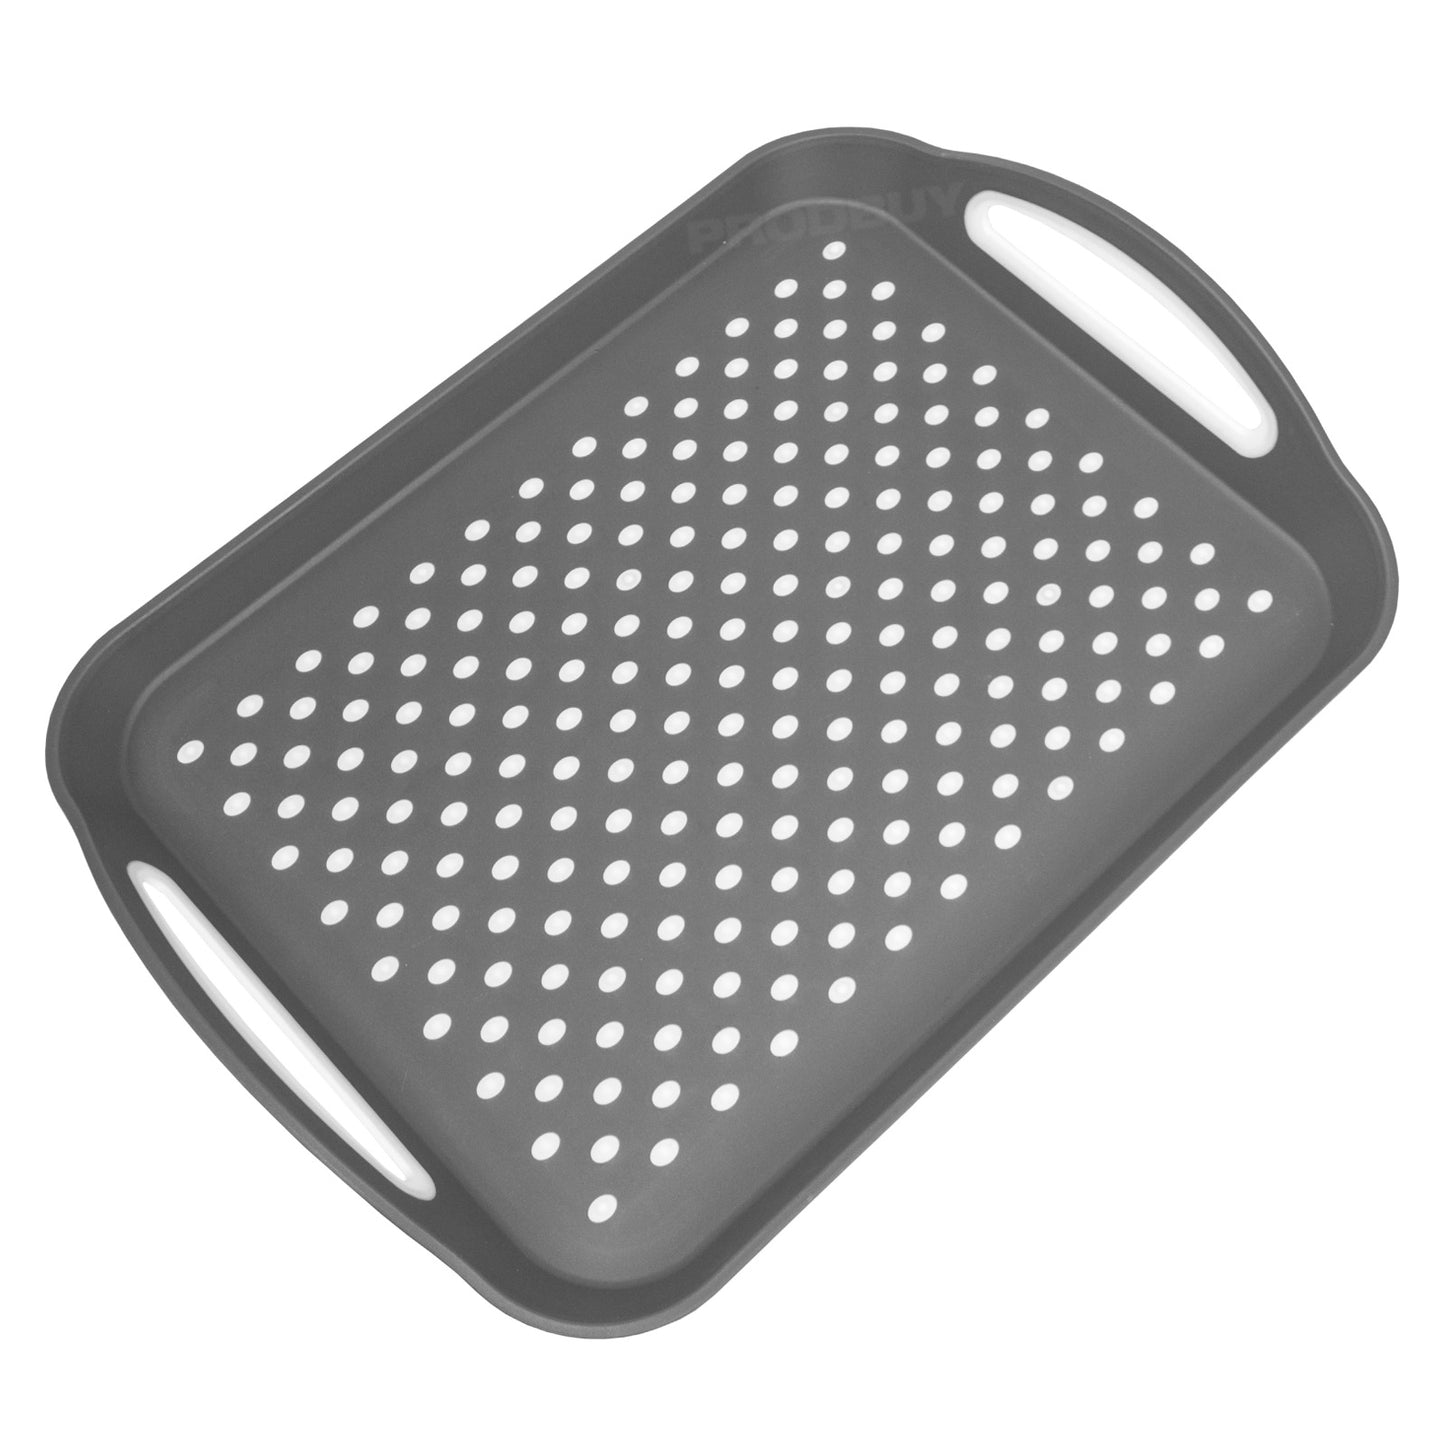 Large 39cm Non-Slip Serving Tray with Handles